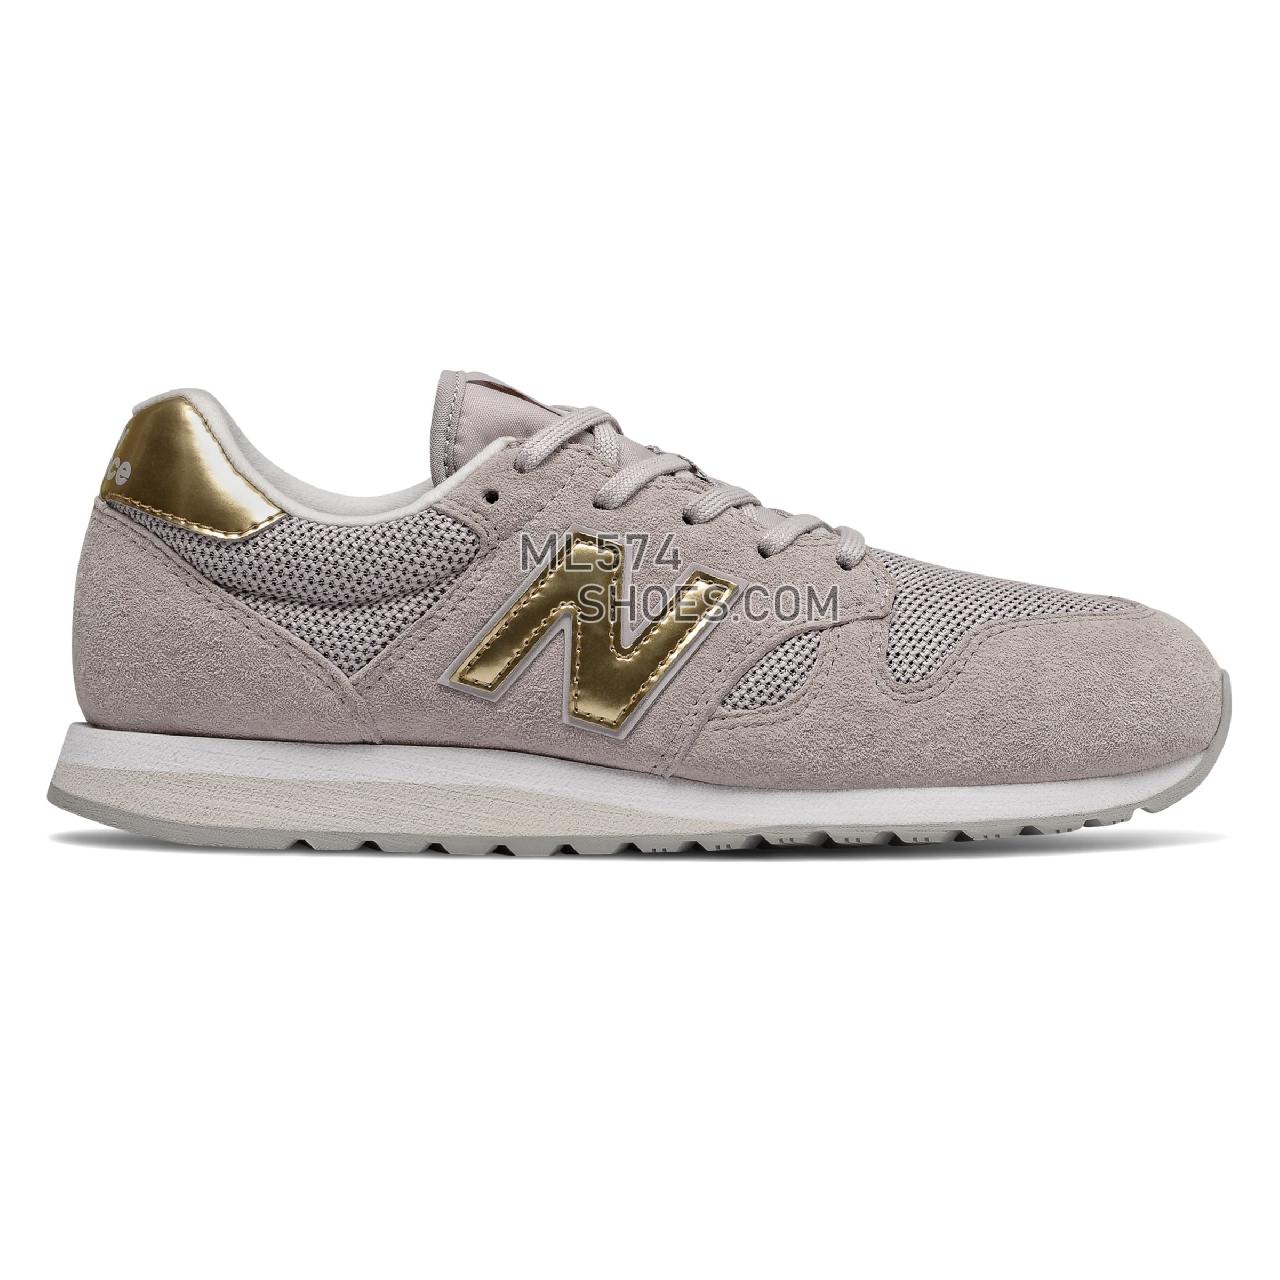 New Balance 520 - Women's Classic Sneakers - Light Cashmere with Classic Gold - WL520GDC